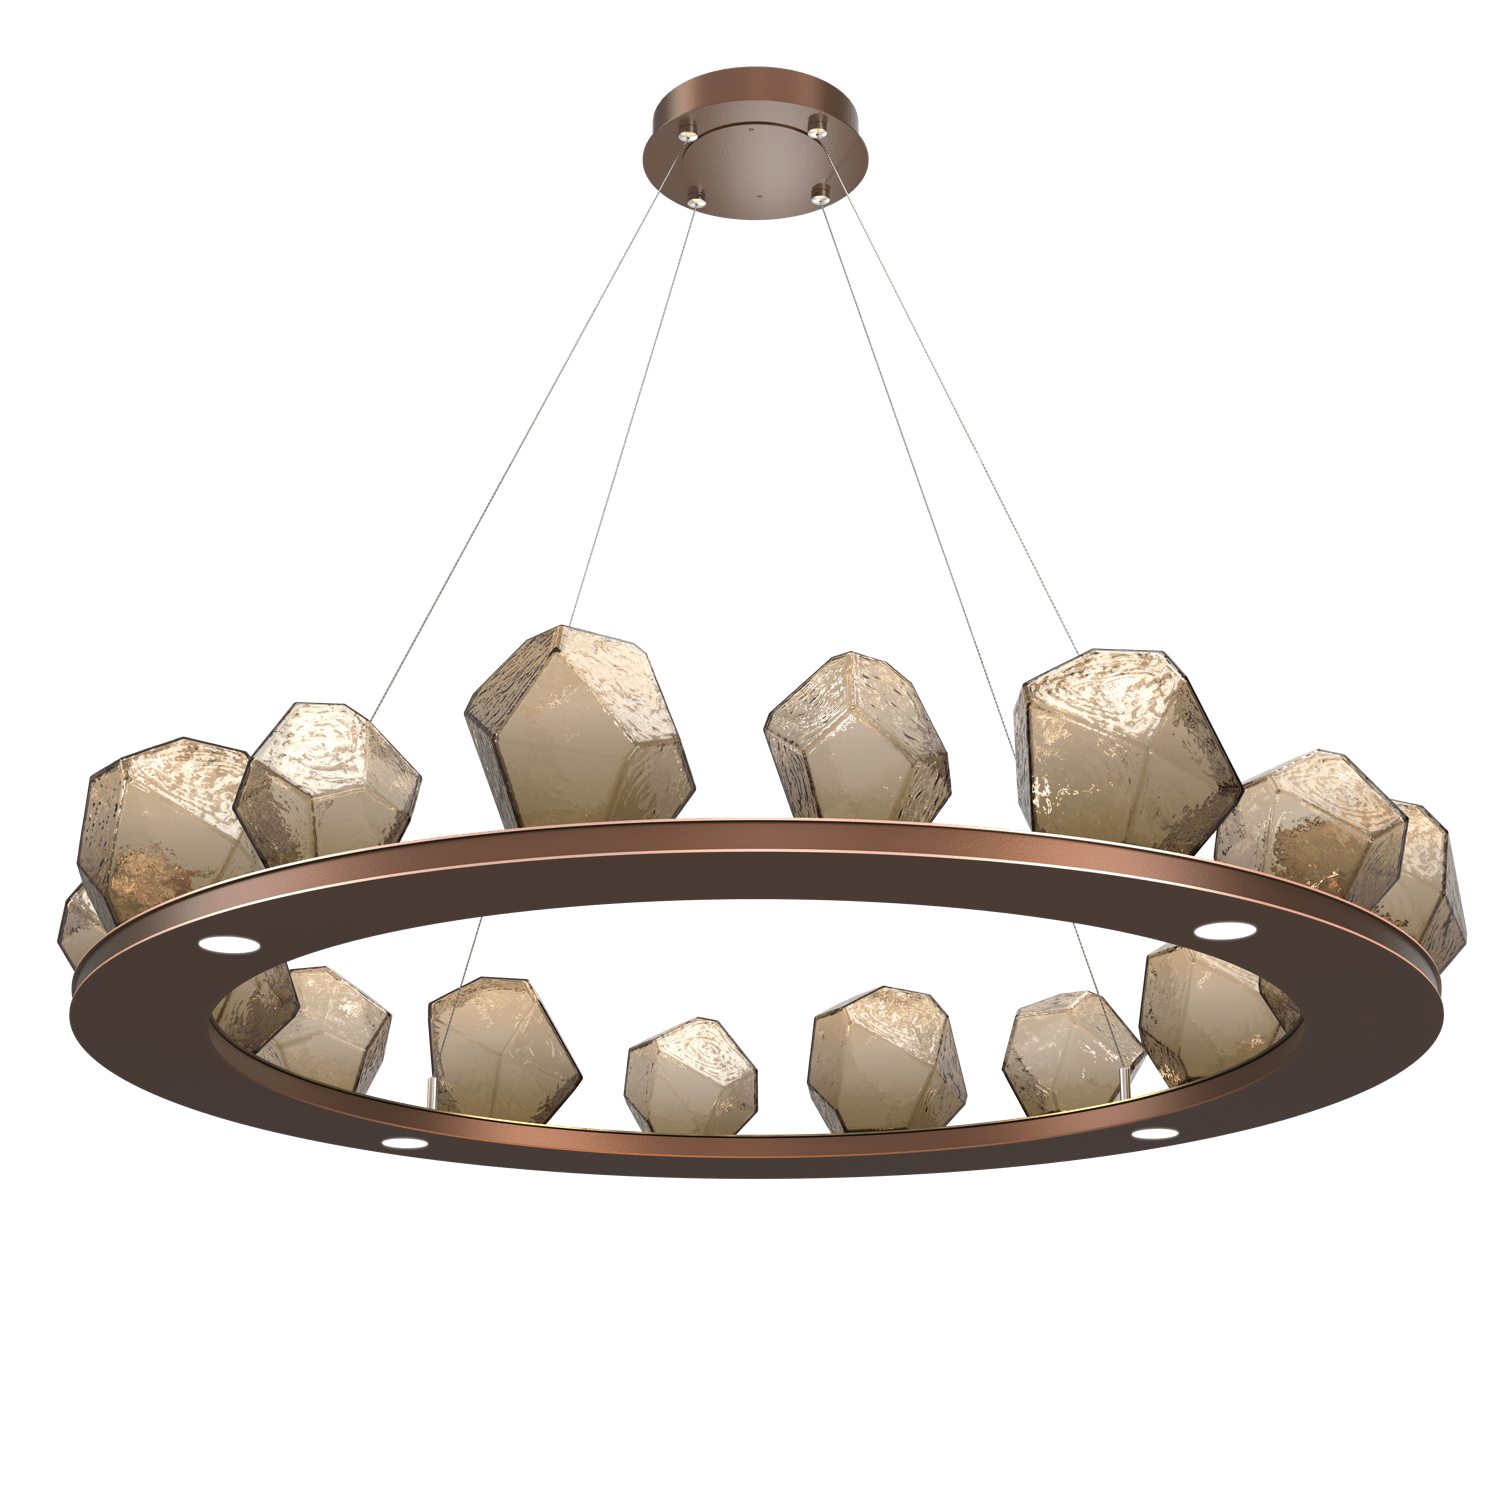 CHB0039-0D-BB-B-Hammerton-Studio-Gem-48-inch-ring-chandelier-with-burnished-bronze-finish-and-bronze-blown-glass-shades-and-LED-lamping